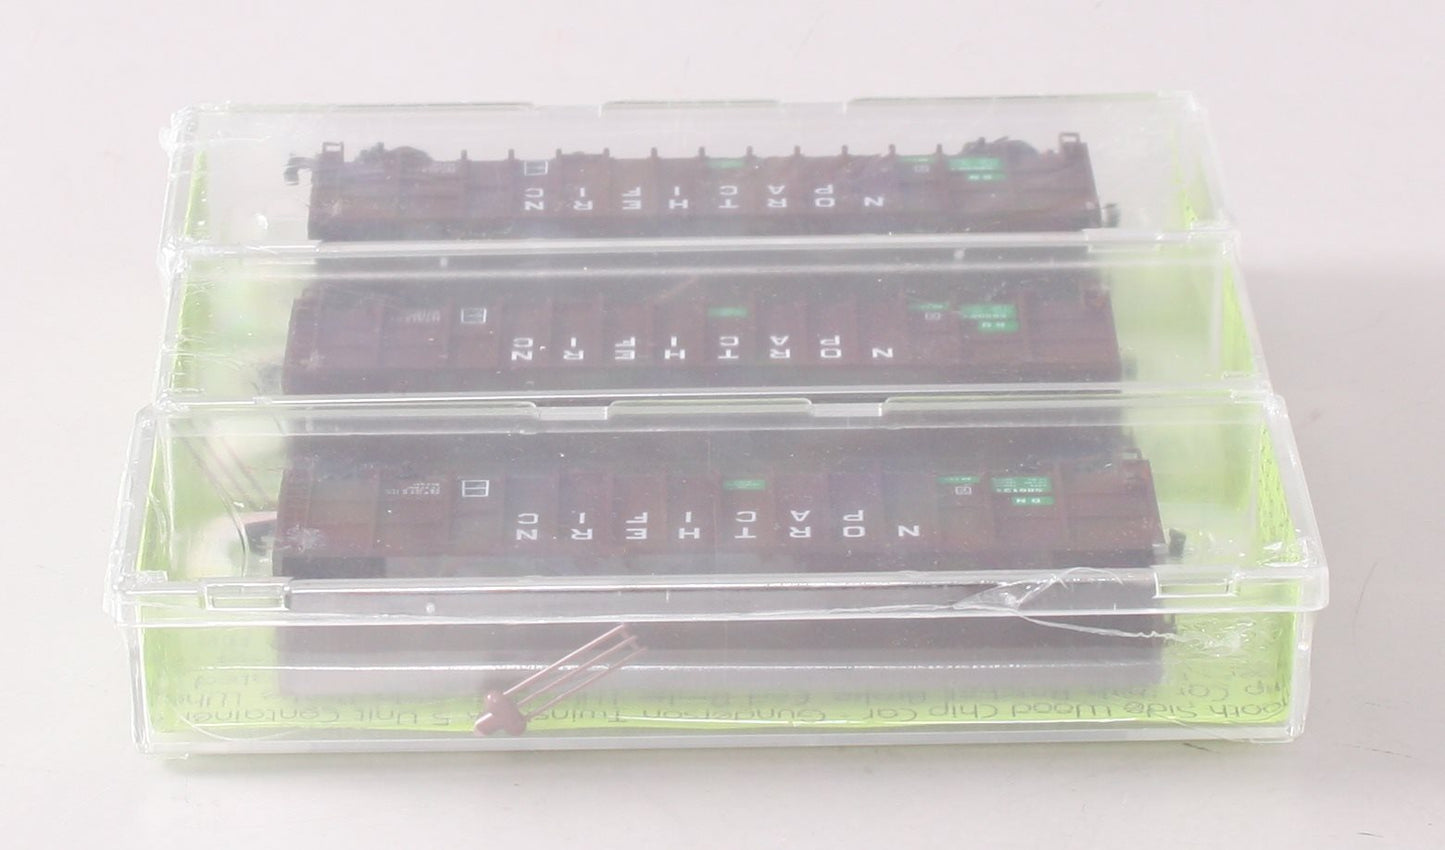 Deluxe Innovations 105403 N Scale BN's Northern Pacific 3 Car Woodchip Car Set EX/Box